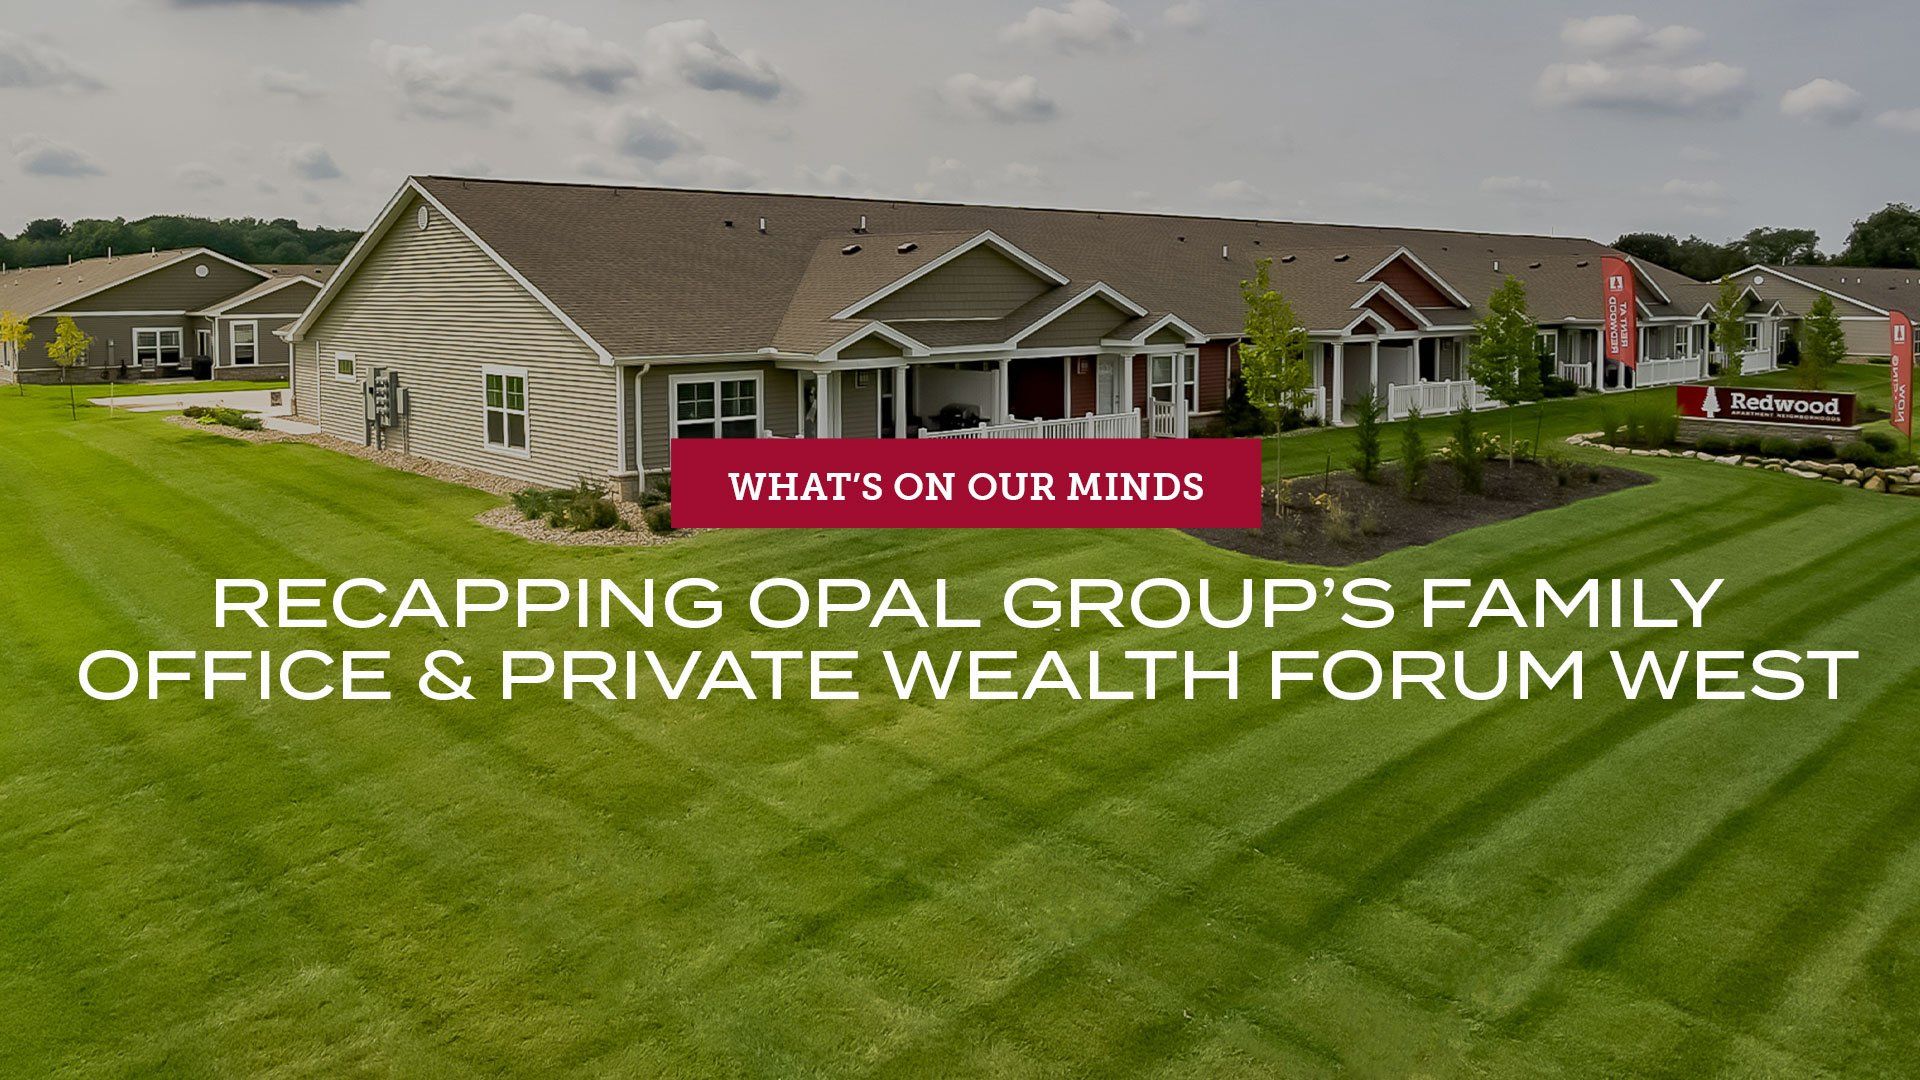 Recapping Opal Group’s Family Office & Private Wealth Forum West